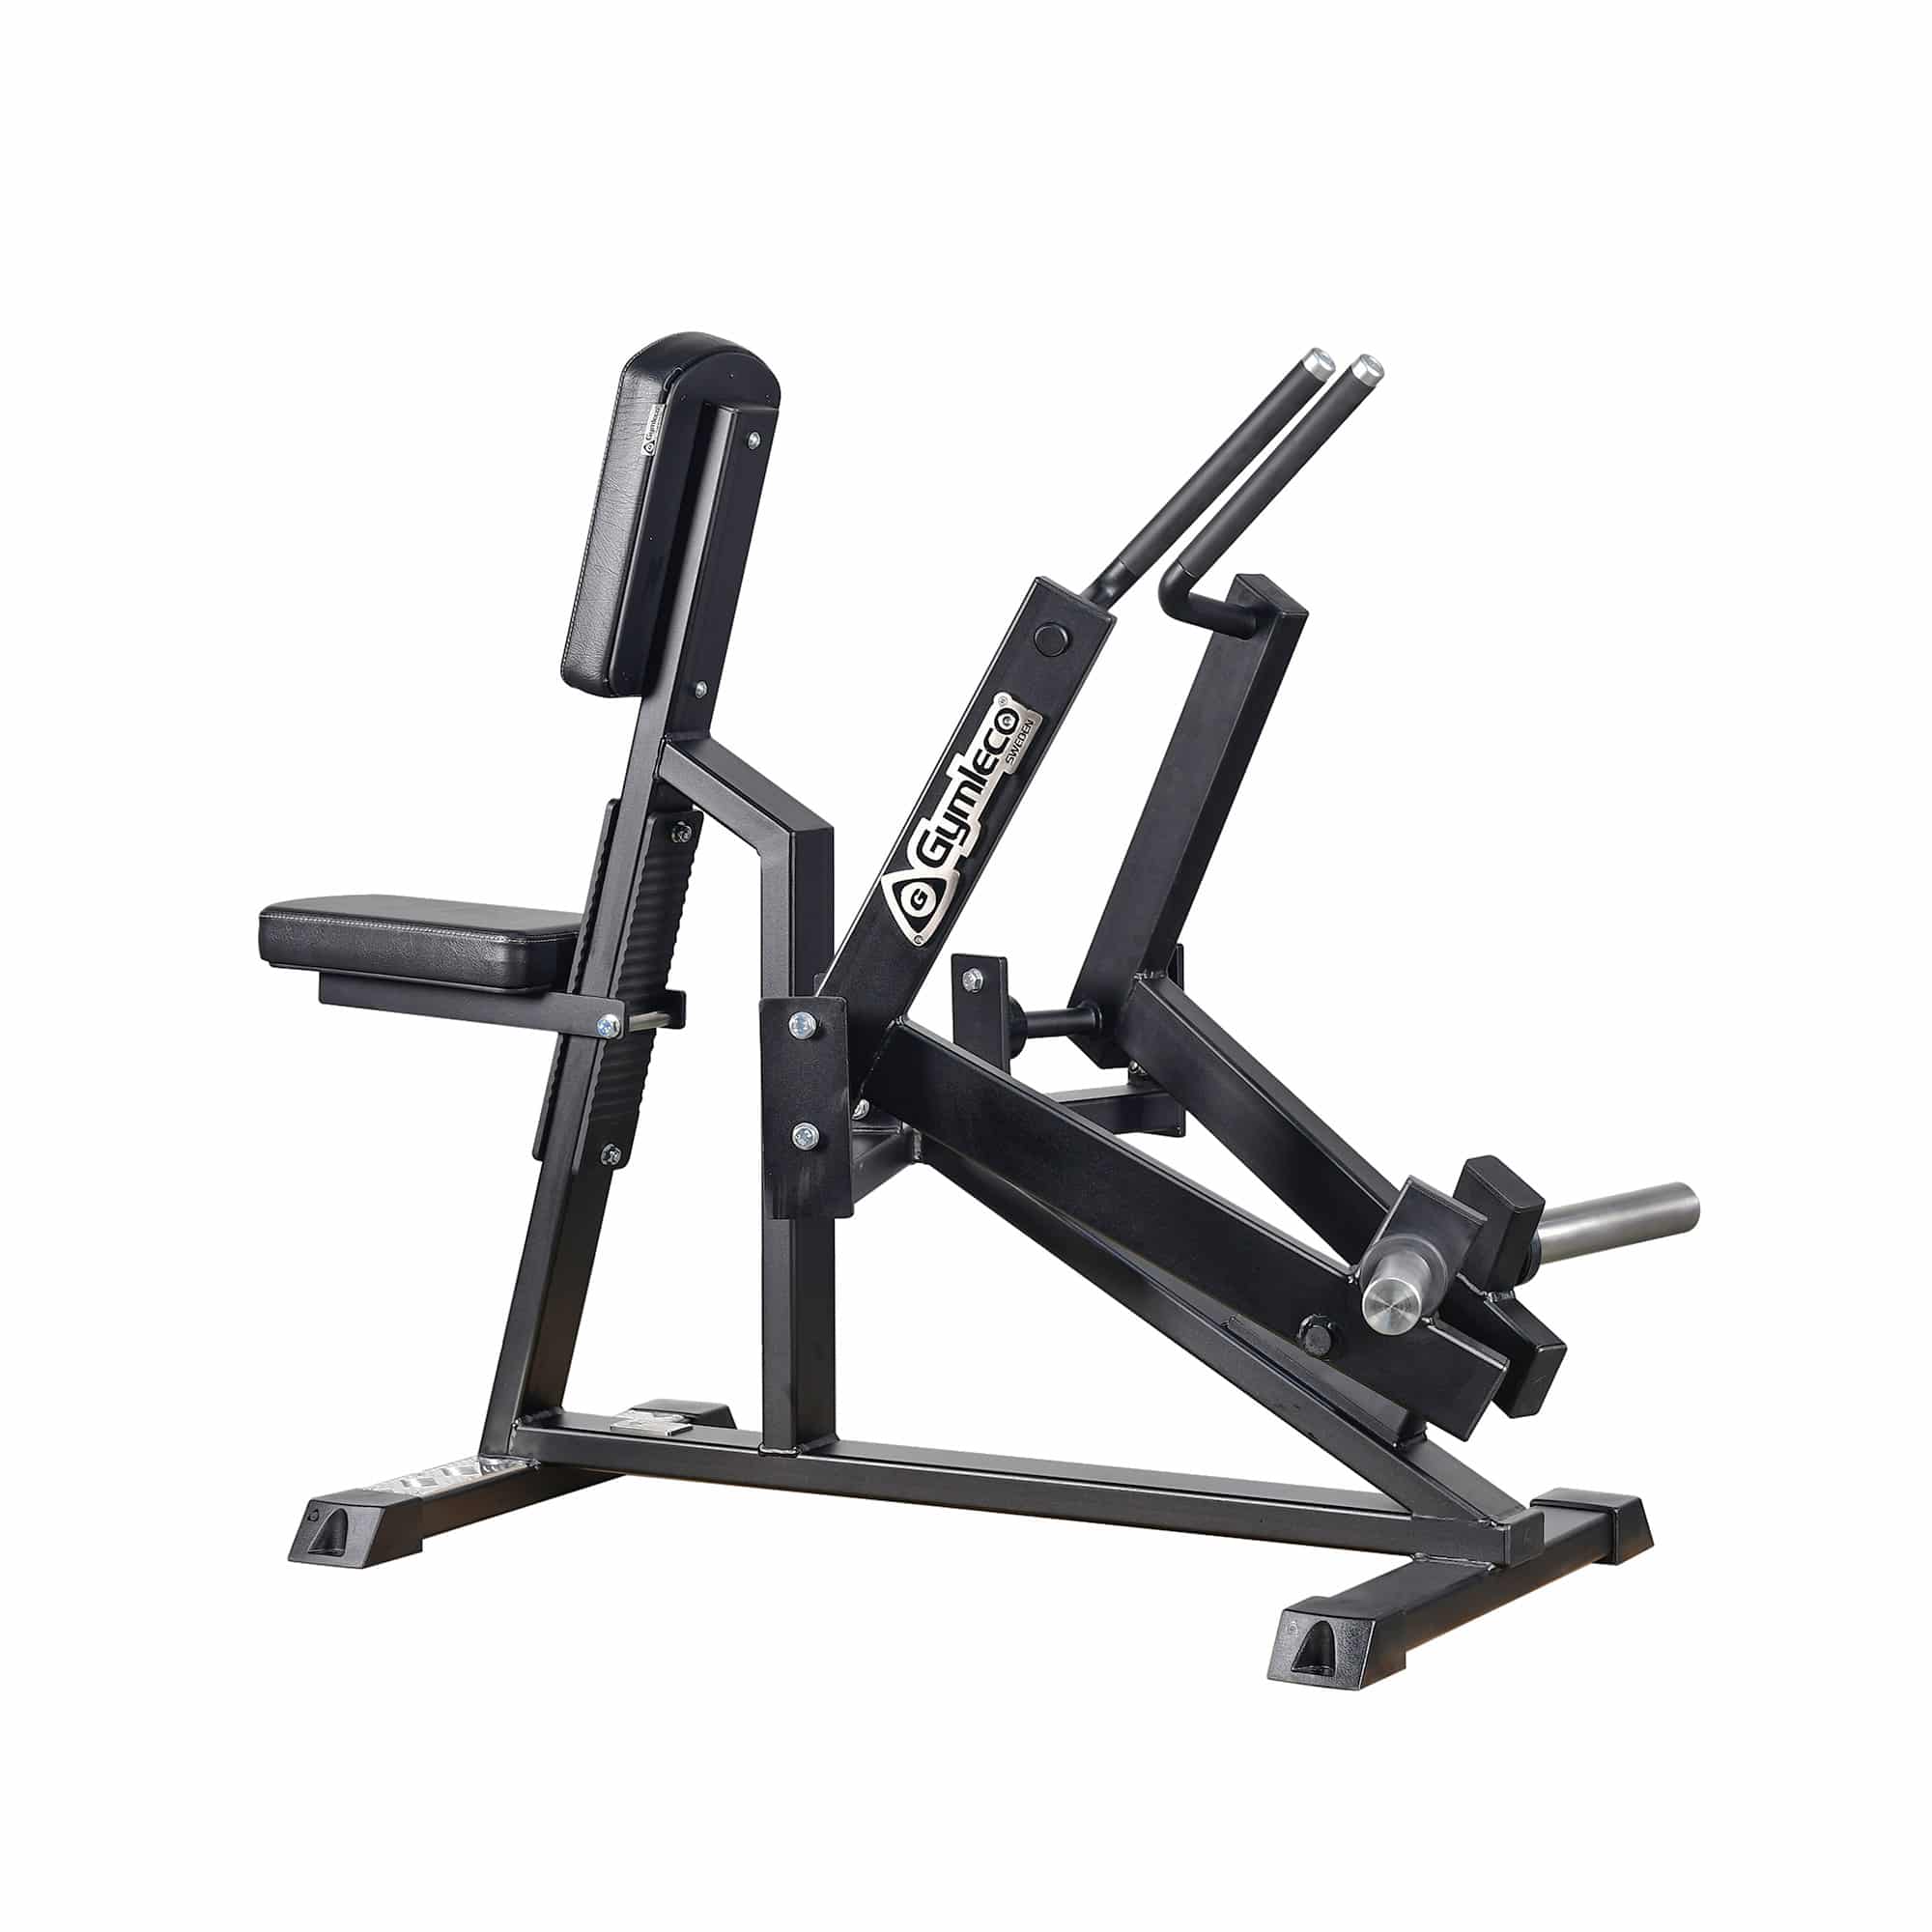 Buy Le Buckle 12 KG Fitness Gym Equipment for Exercise & Workout,  Accessories for Men and Women (3kg x 4 Plates, 14 inches PVC Dumbbell Rods  Set) Online at Low Prices in